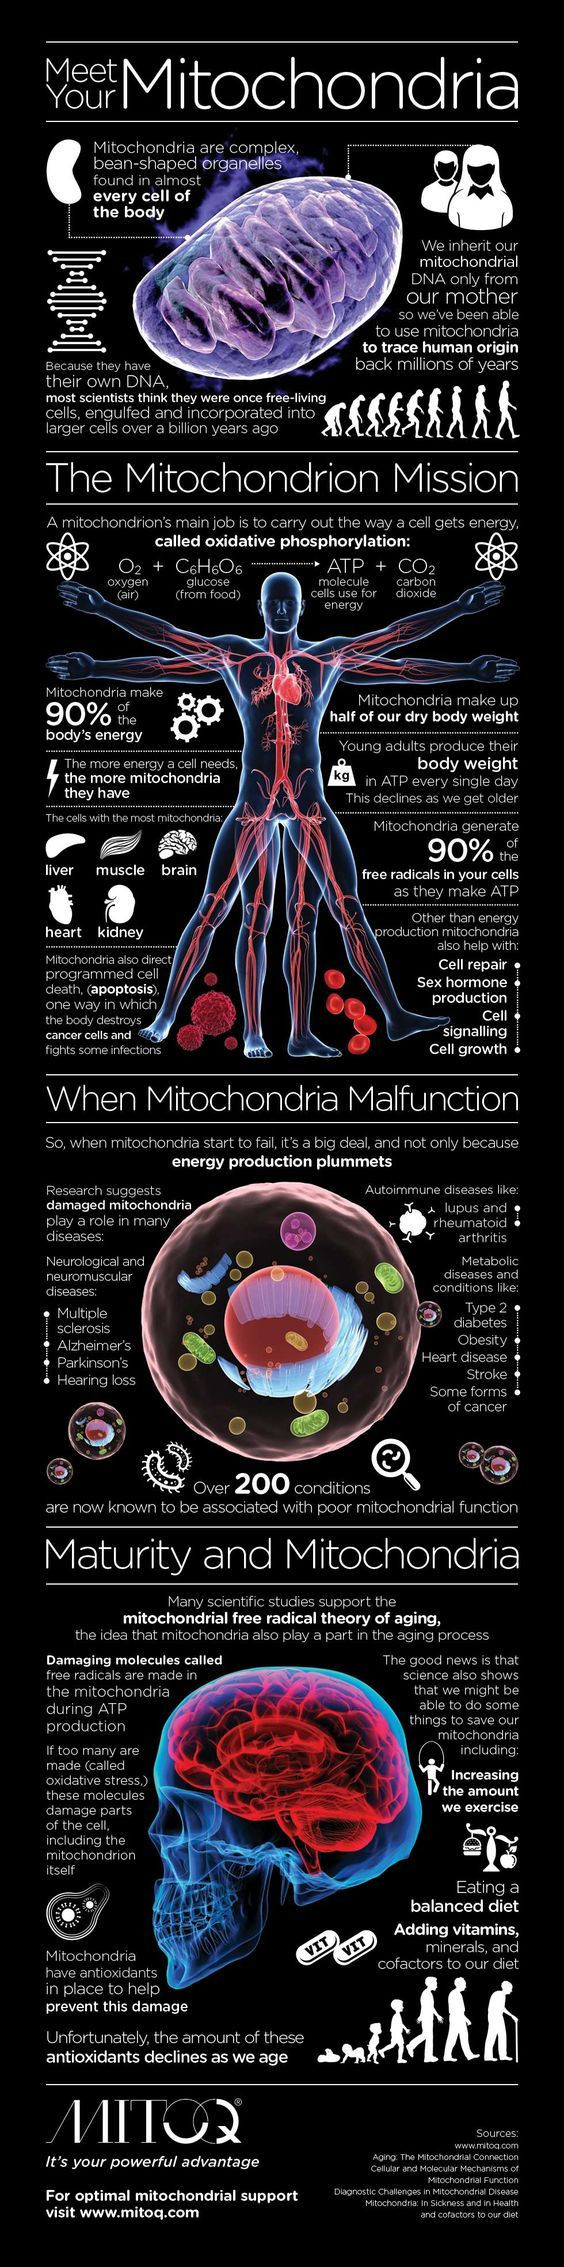 Darwin039s Natural Selection Worksheet Answers My Mighty Mitochondrion ð¤£ In 2020